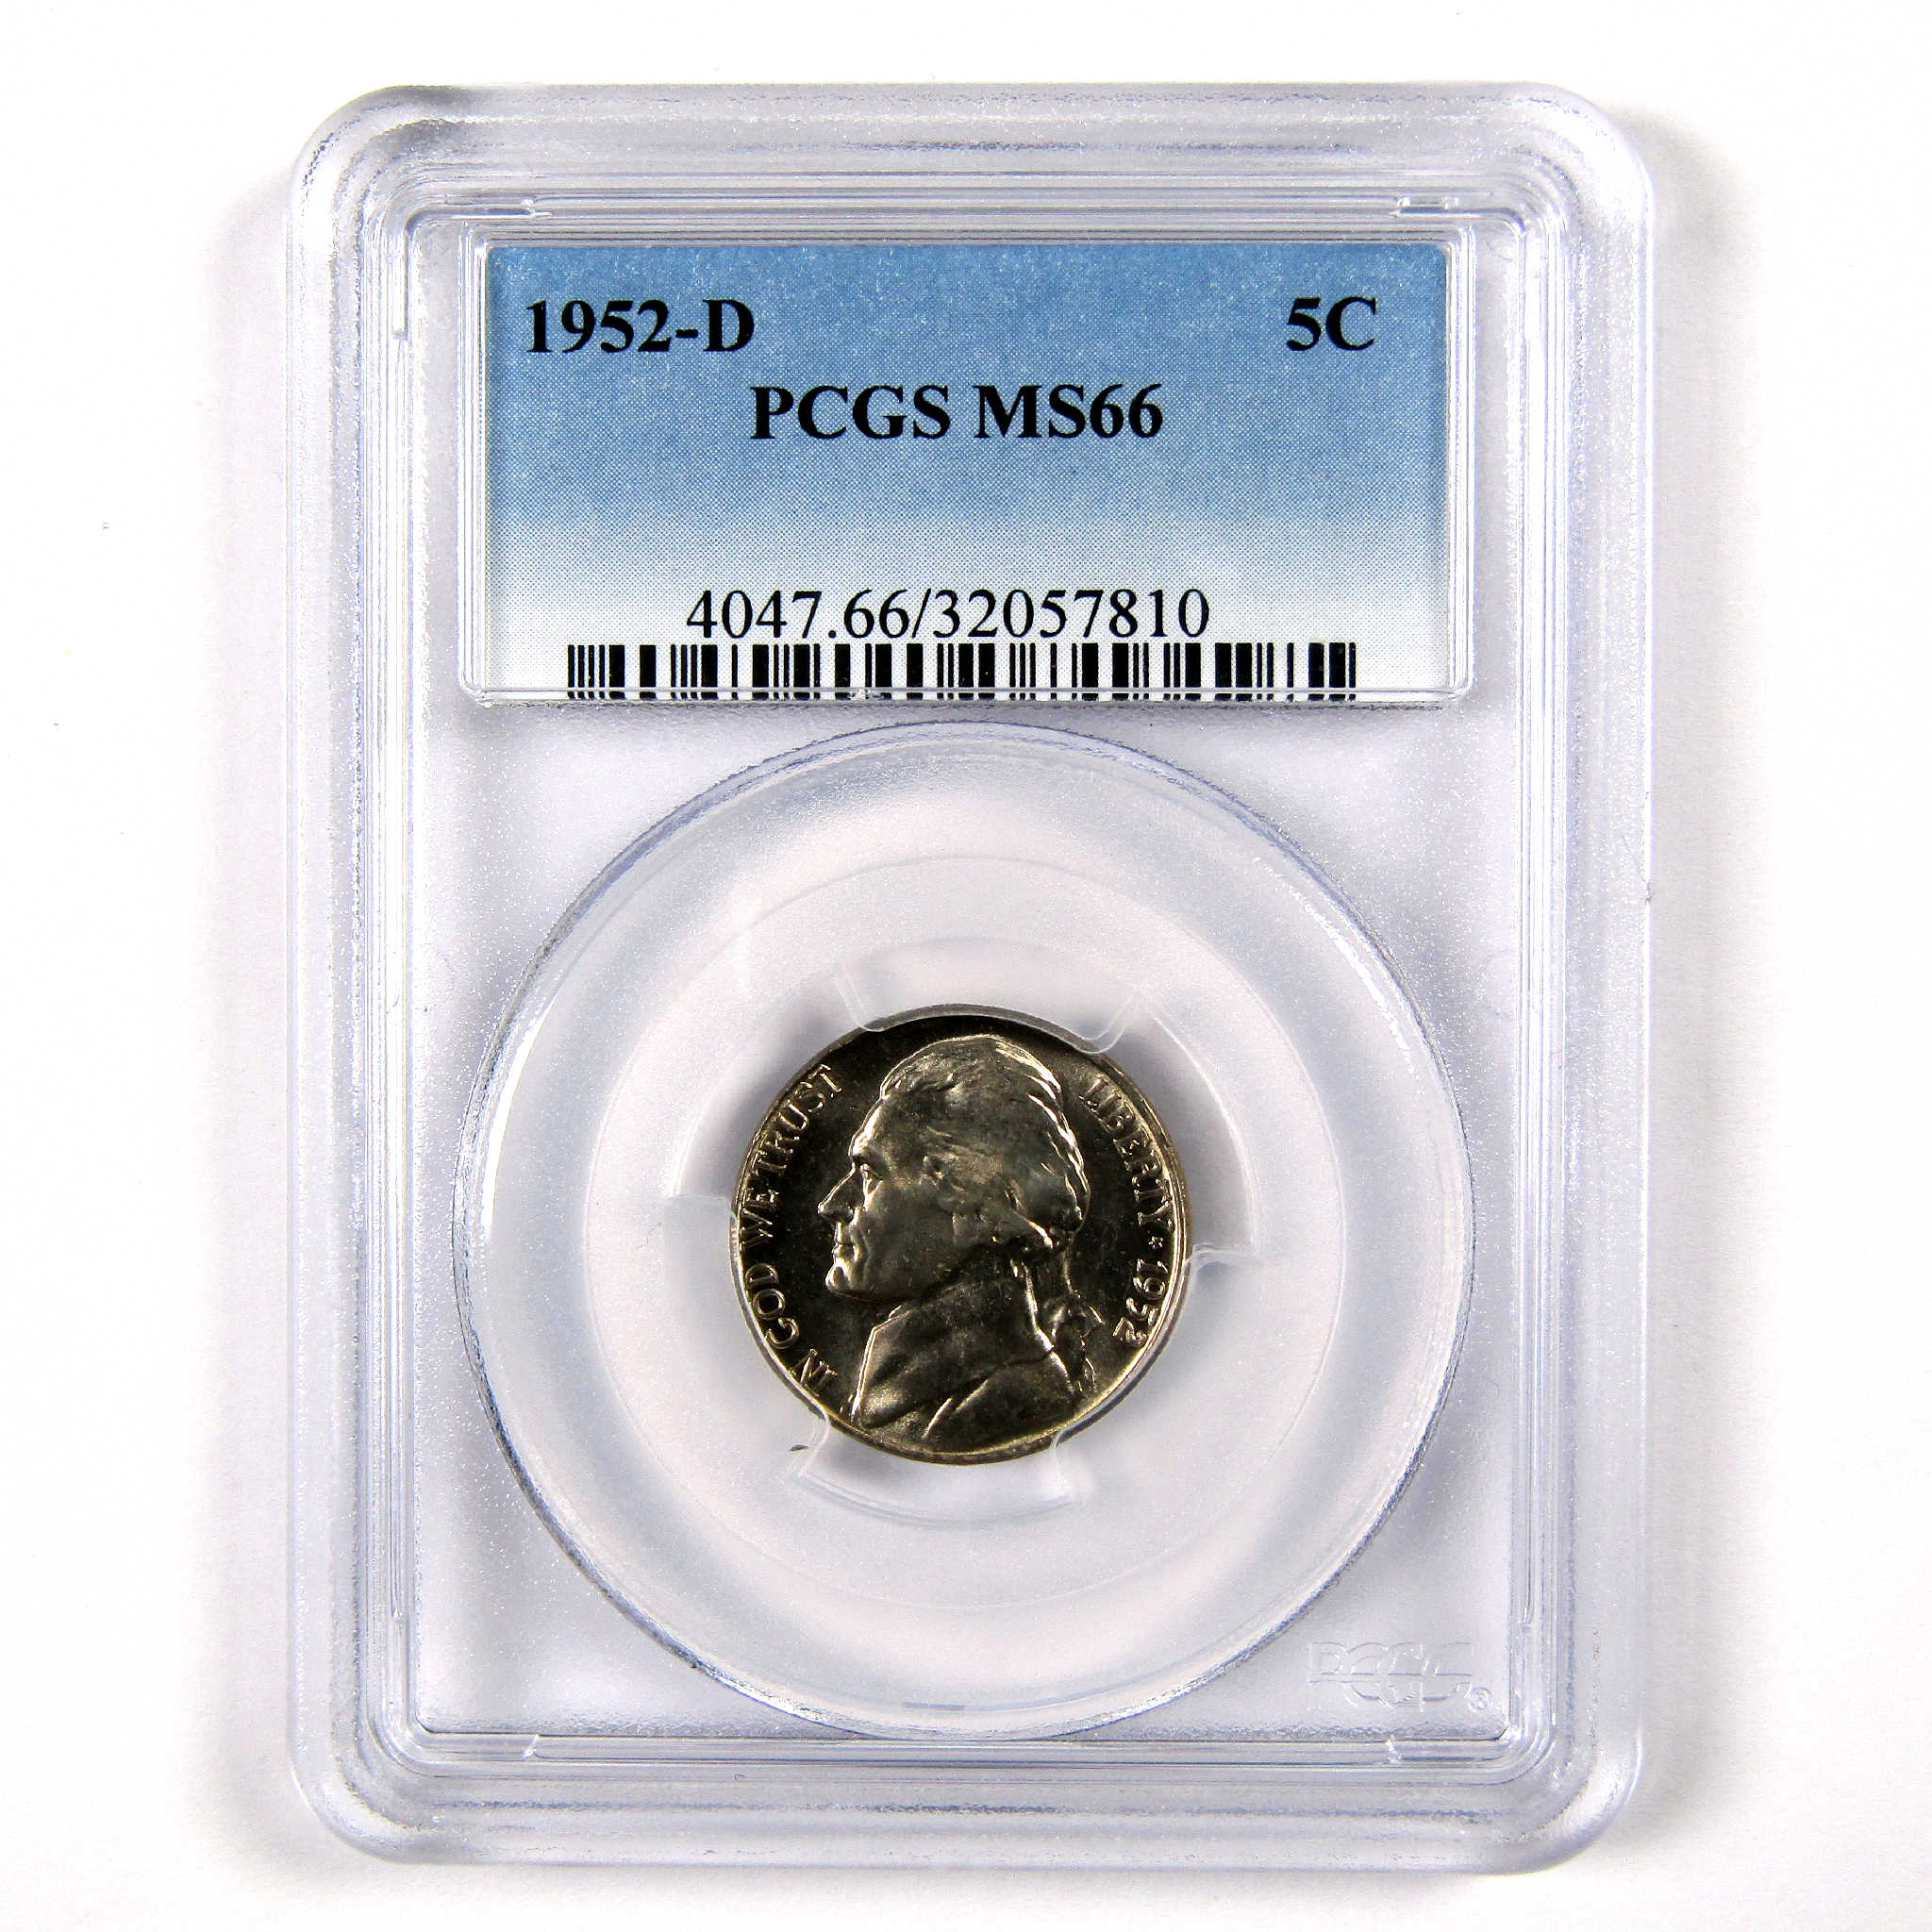 1952 D Jefferson Nickel MS 66 PCGS 5c Uncirculated Coin SKU:CPC5206